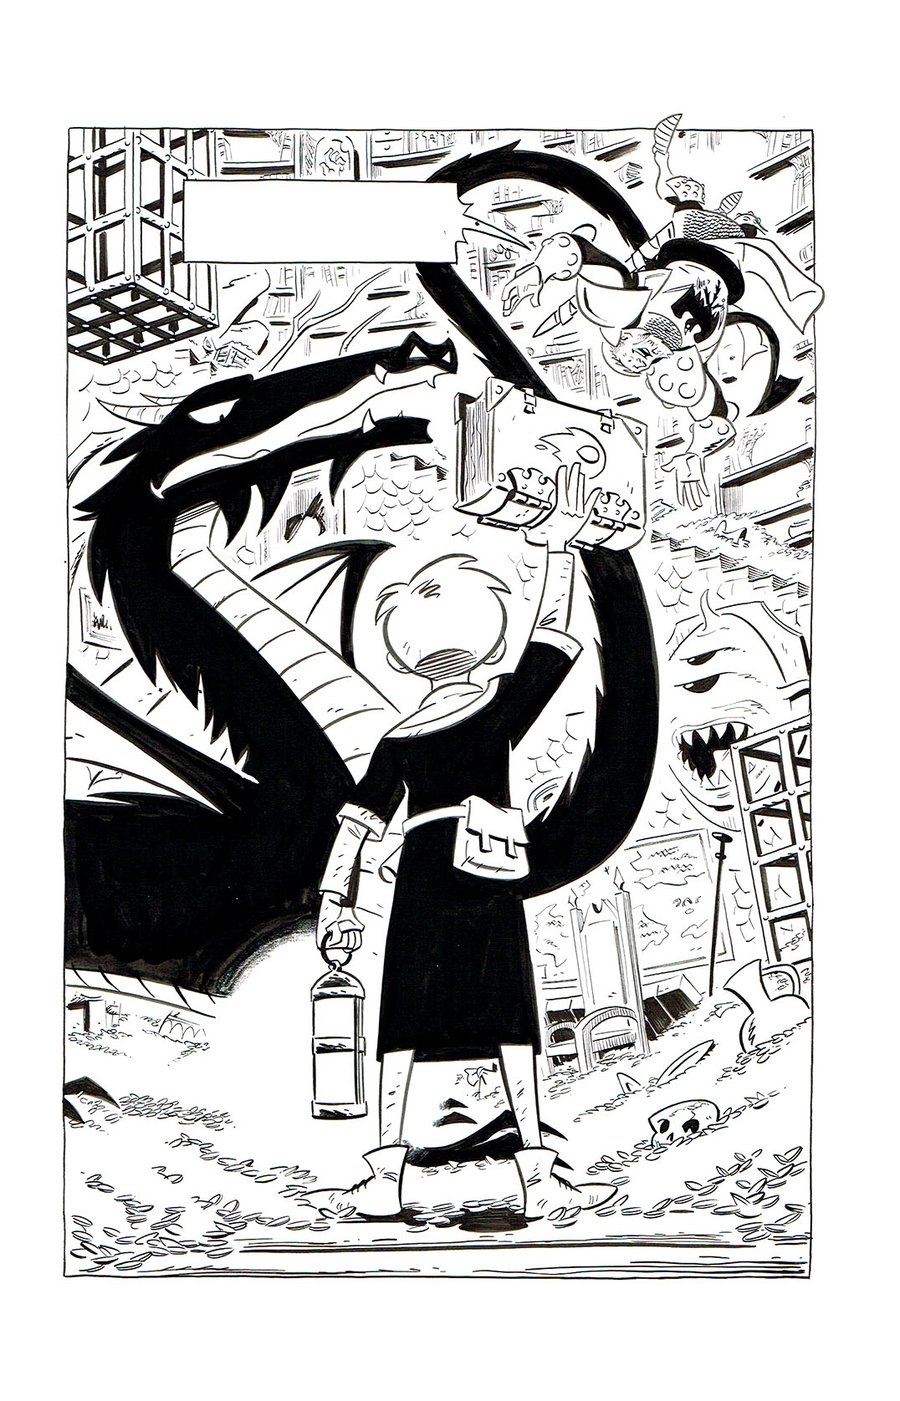 Image of SQUIRE & KNIGHT page 146 original art